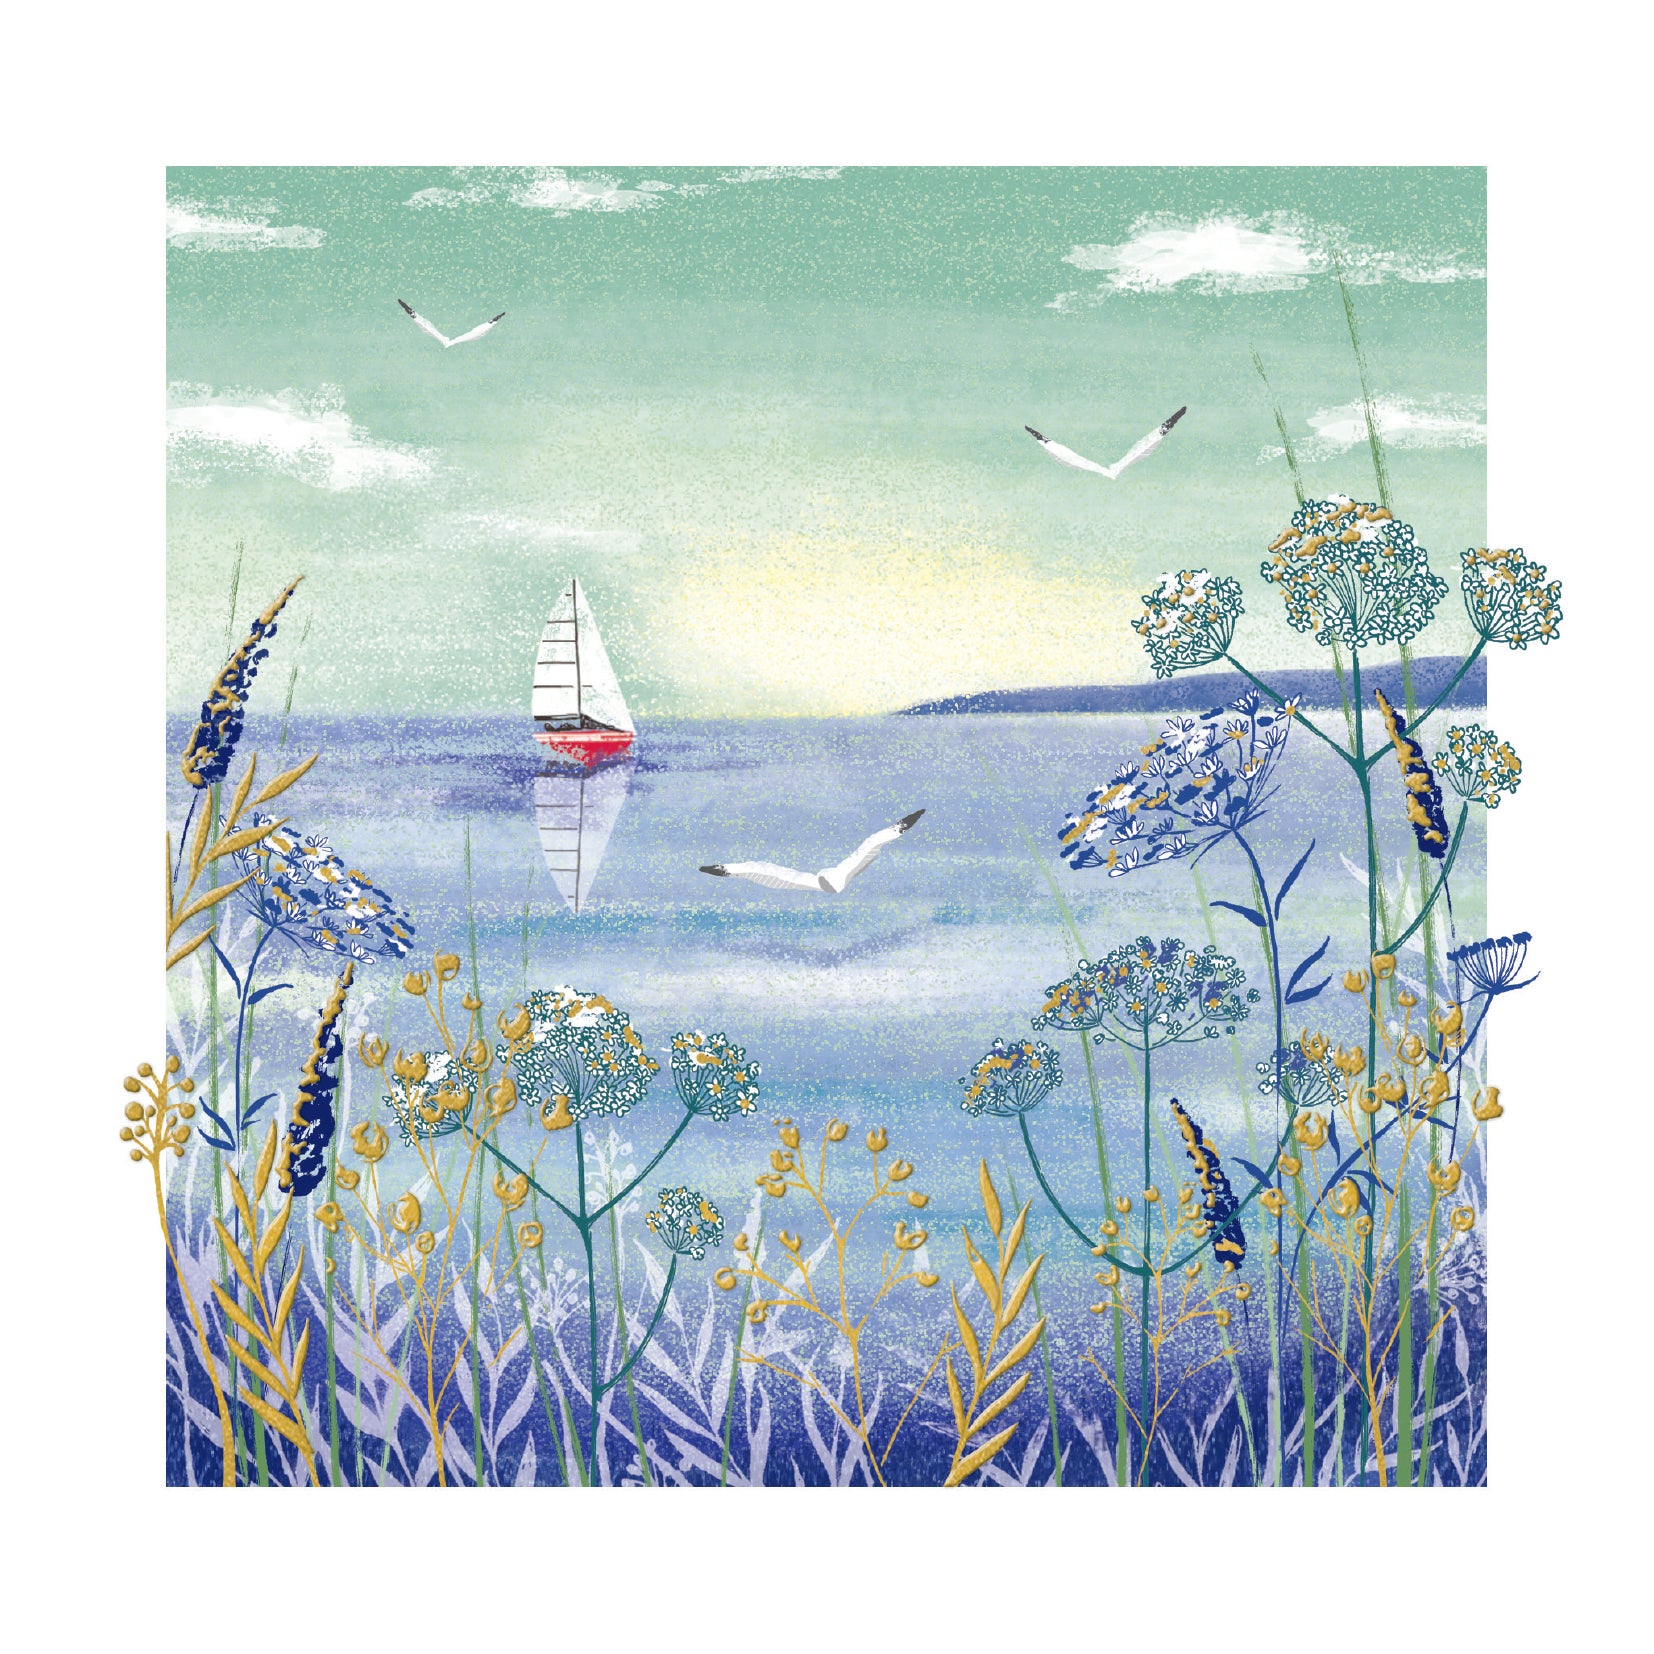 Sailboat and Seagulls Art Card from Penny Black